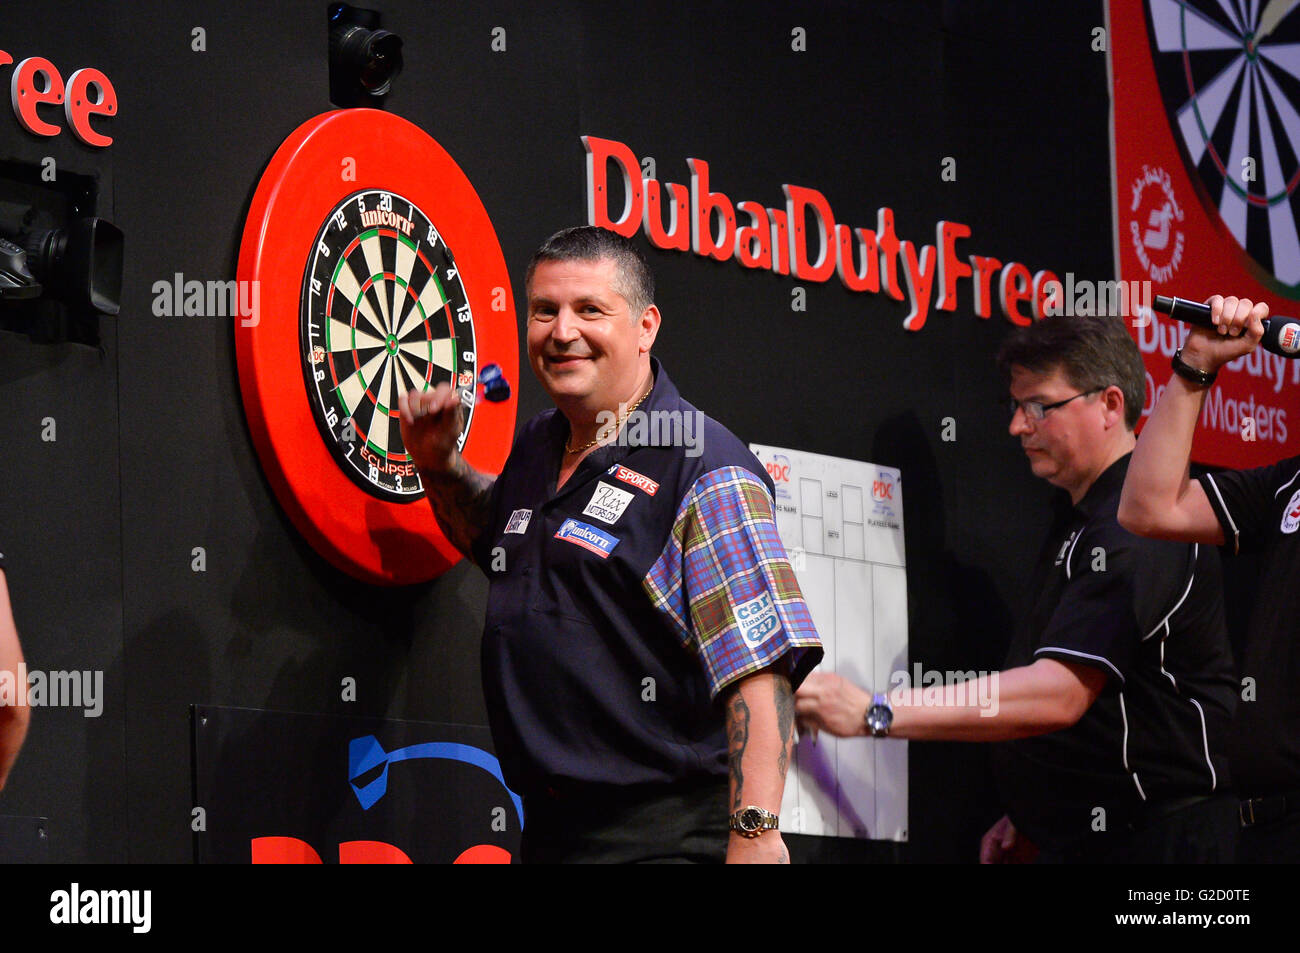 DUBAI, UAE, 27th March 2016. Scotland's Gary Anderson is all smiles after winning the 2016 Dubai Duty Free Masters Tournament. Current PDC World Champion Anderson beat defending three time DDF Masters